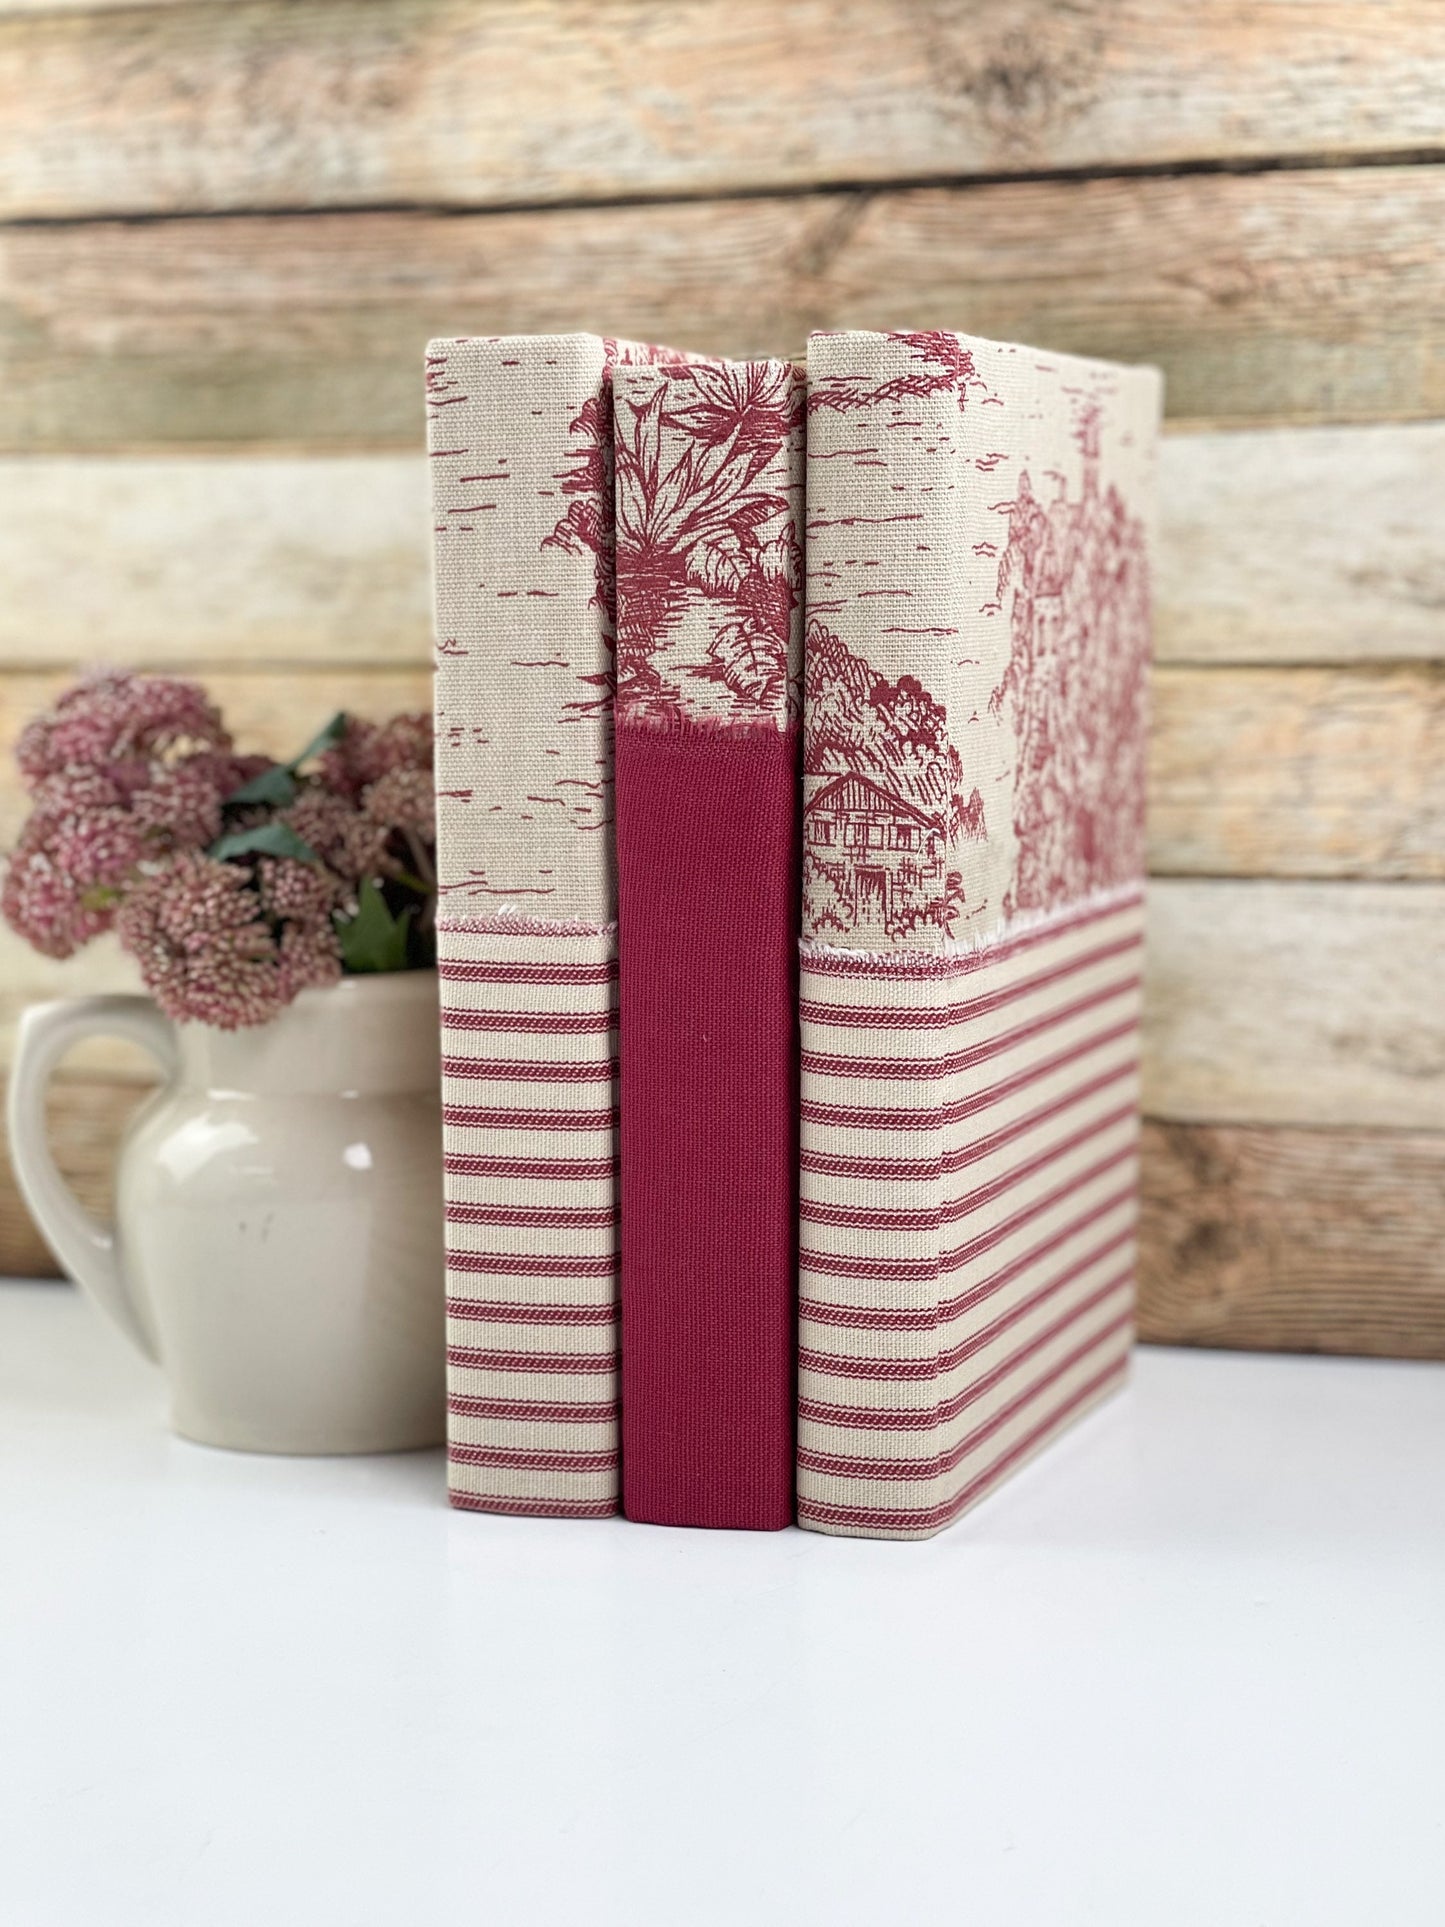 Red Fabric Covered Books